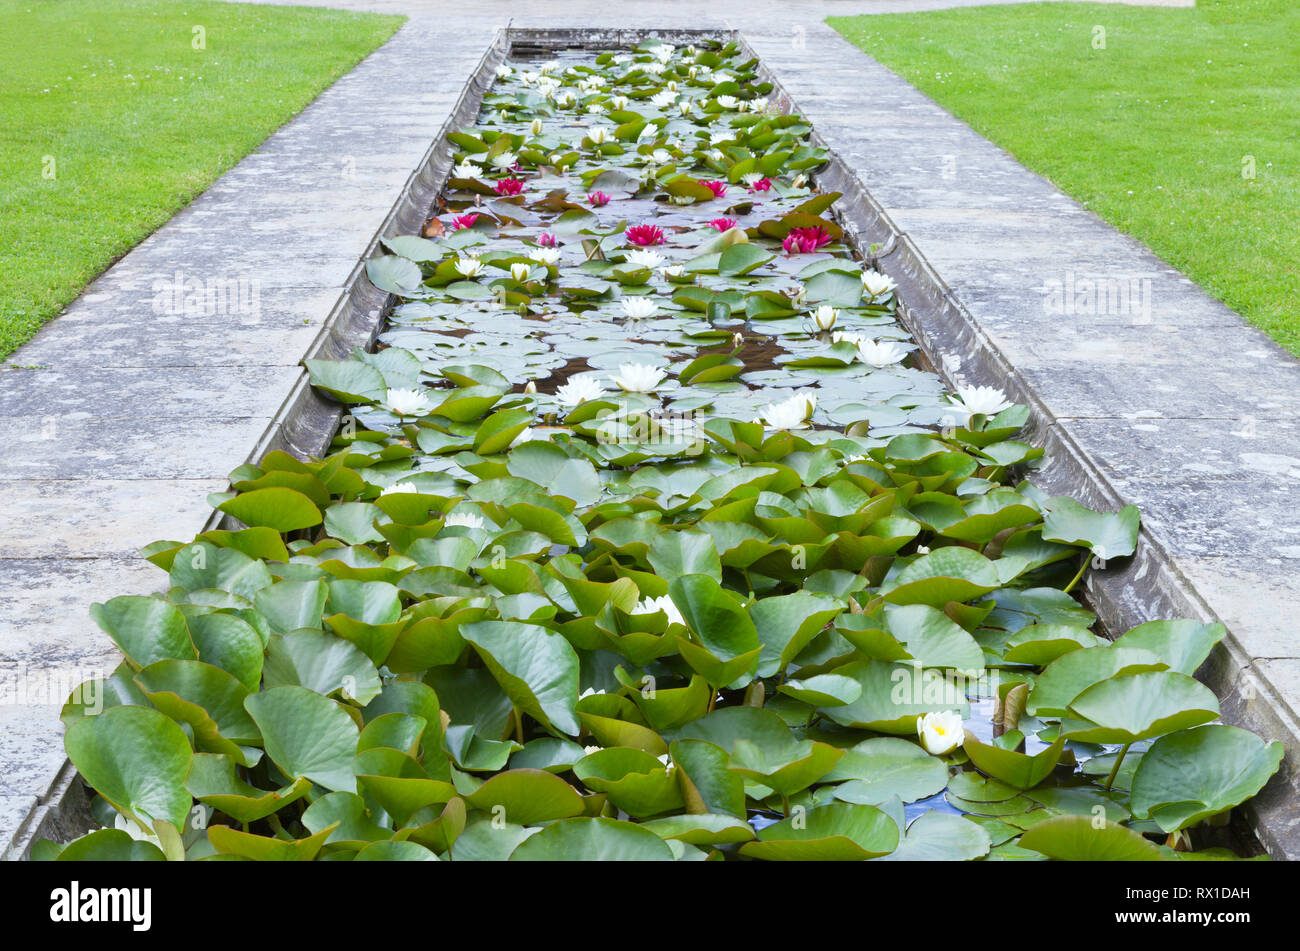 Flowering white and red water lilies in a rectangular stone pond, in an English garden . Stock Photo